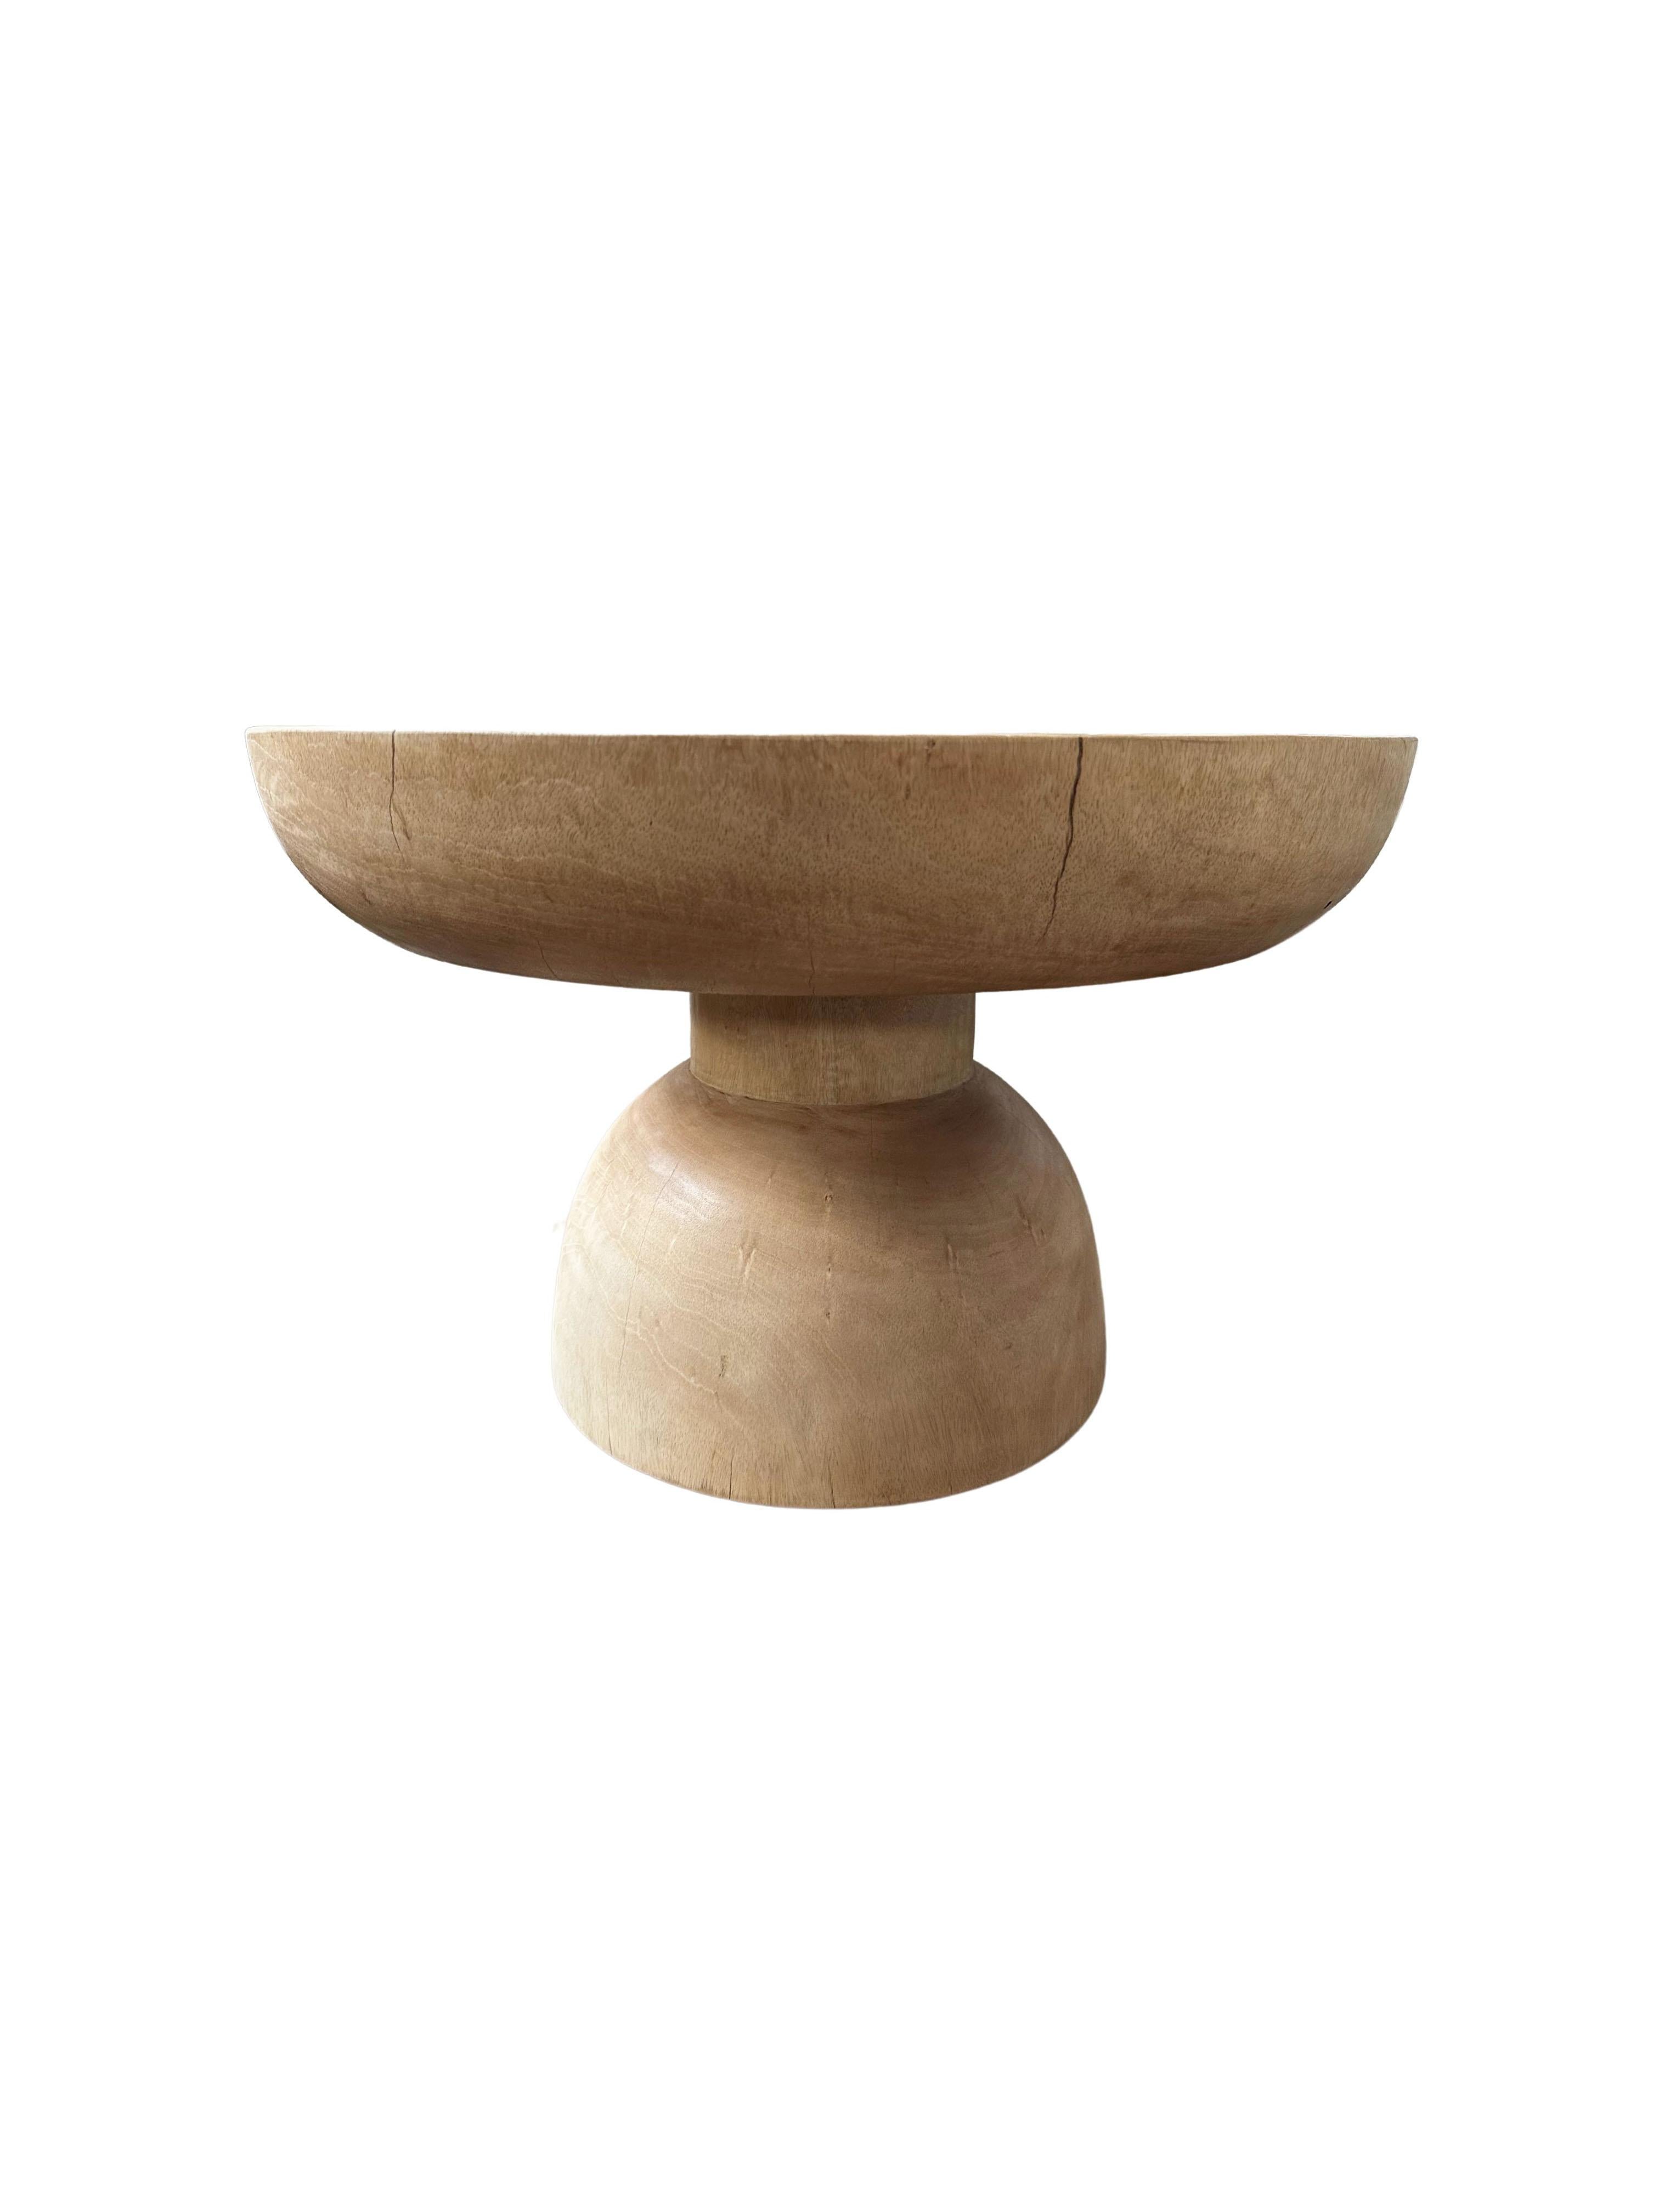 Indonesian Sculptural Round Table Mango Wood, Natural Finish, Modern Organic For Sale